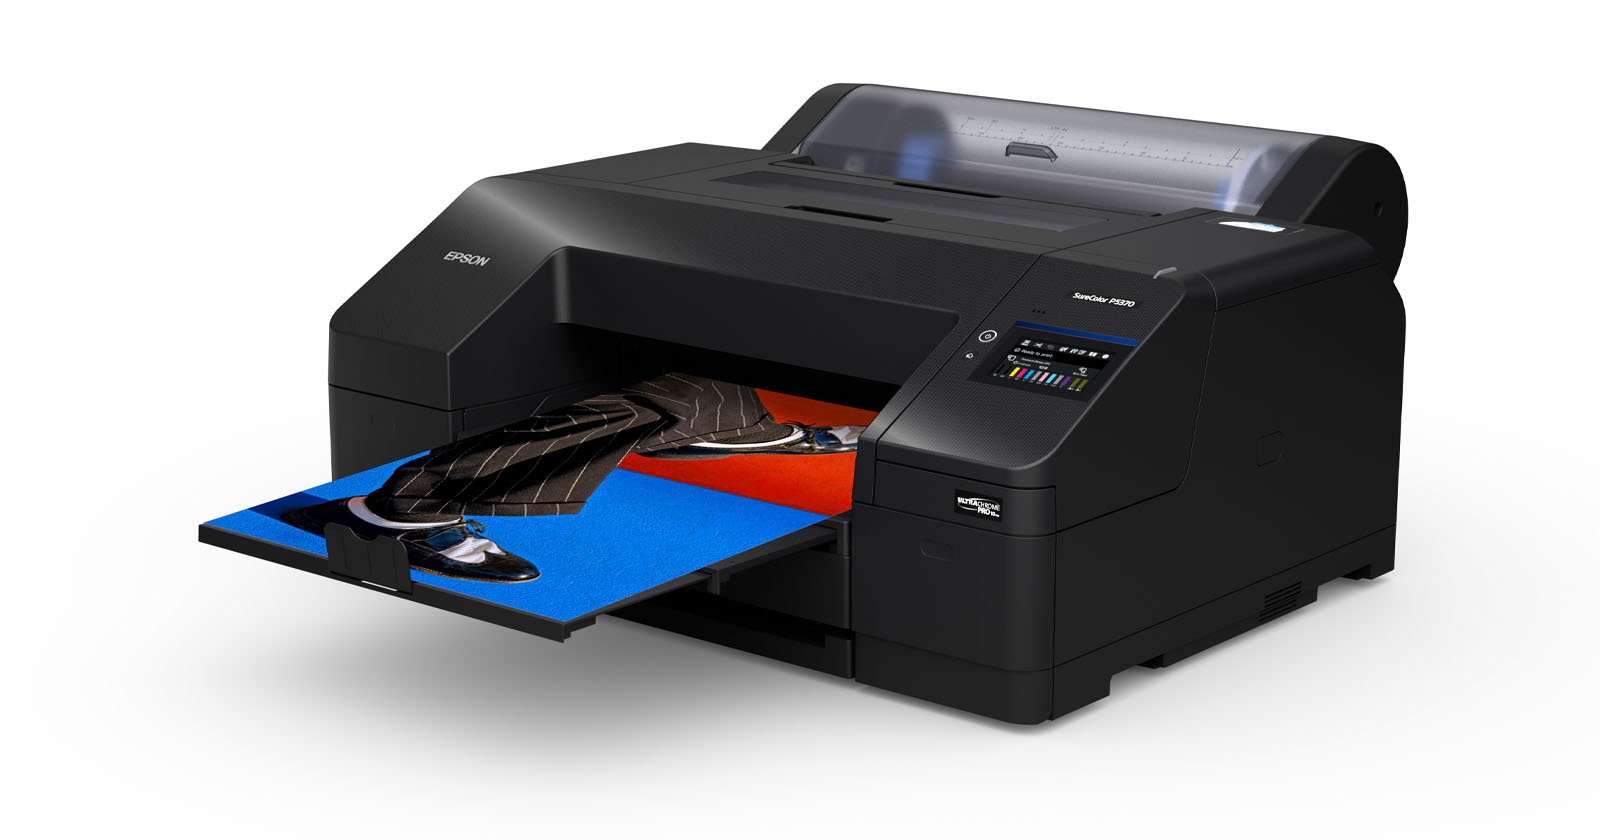 Epsons SureColor P5370 is an New Pro-Level 17-inch Photo Printer